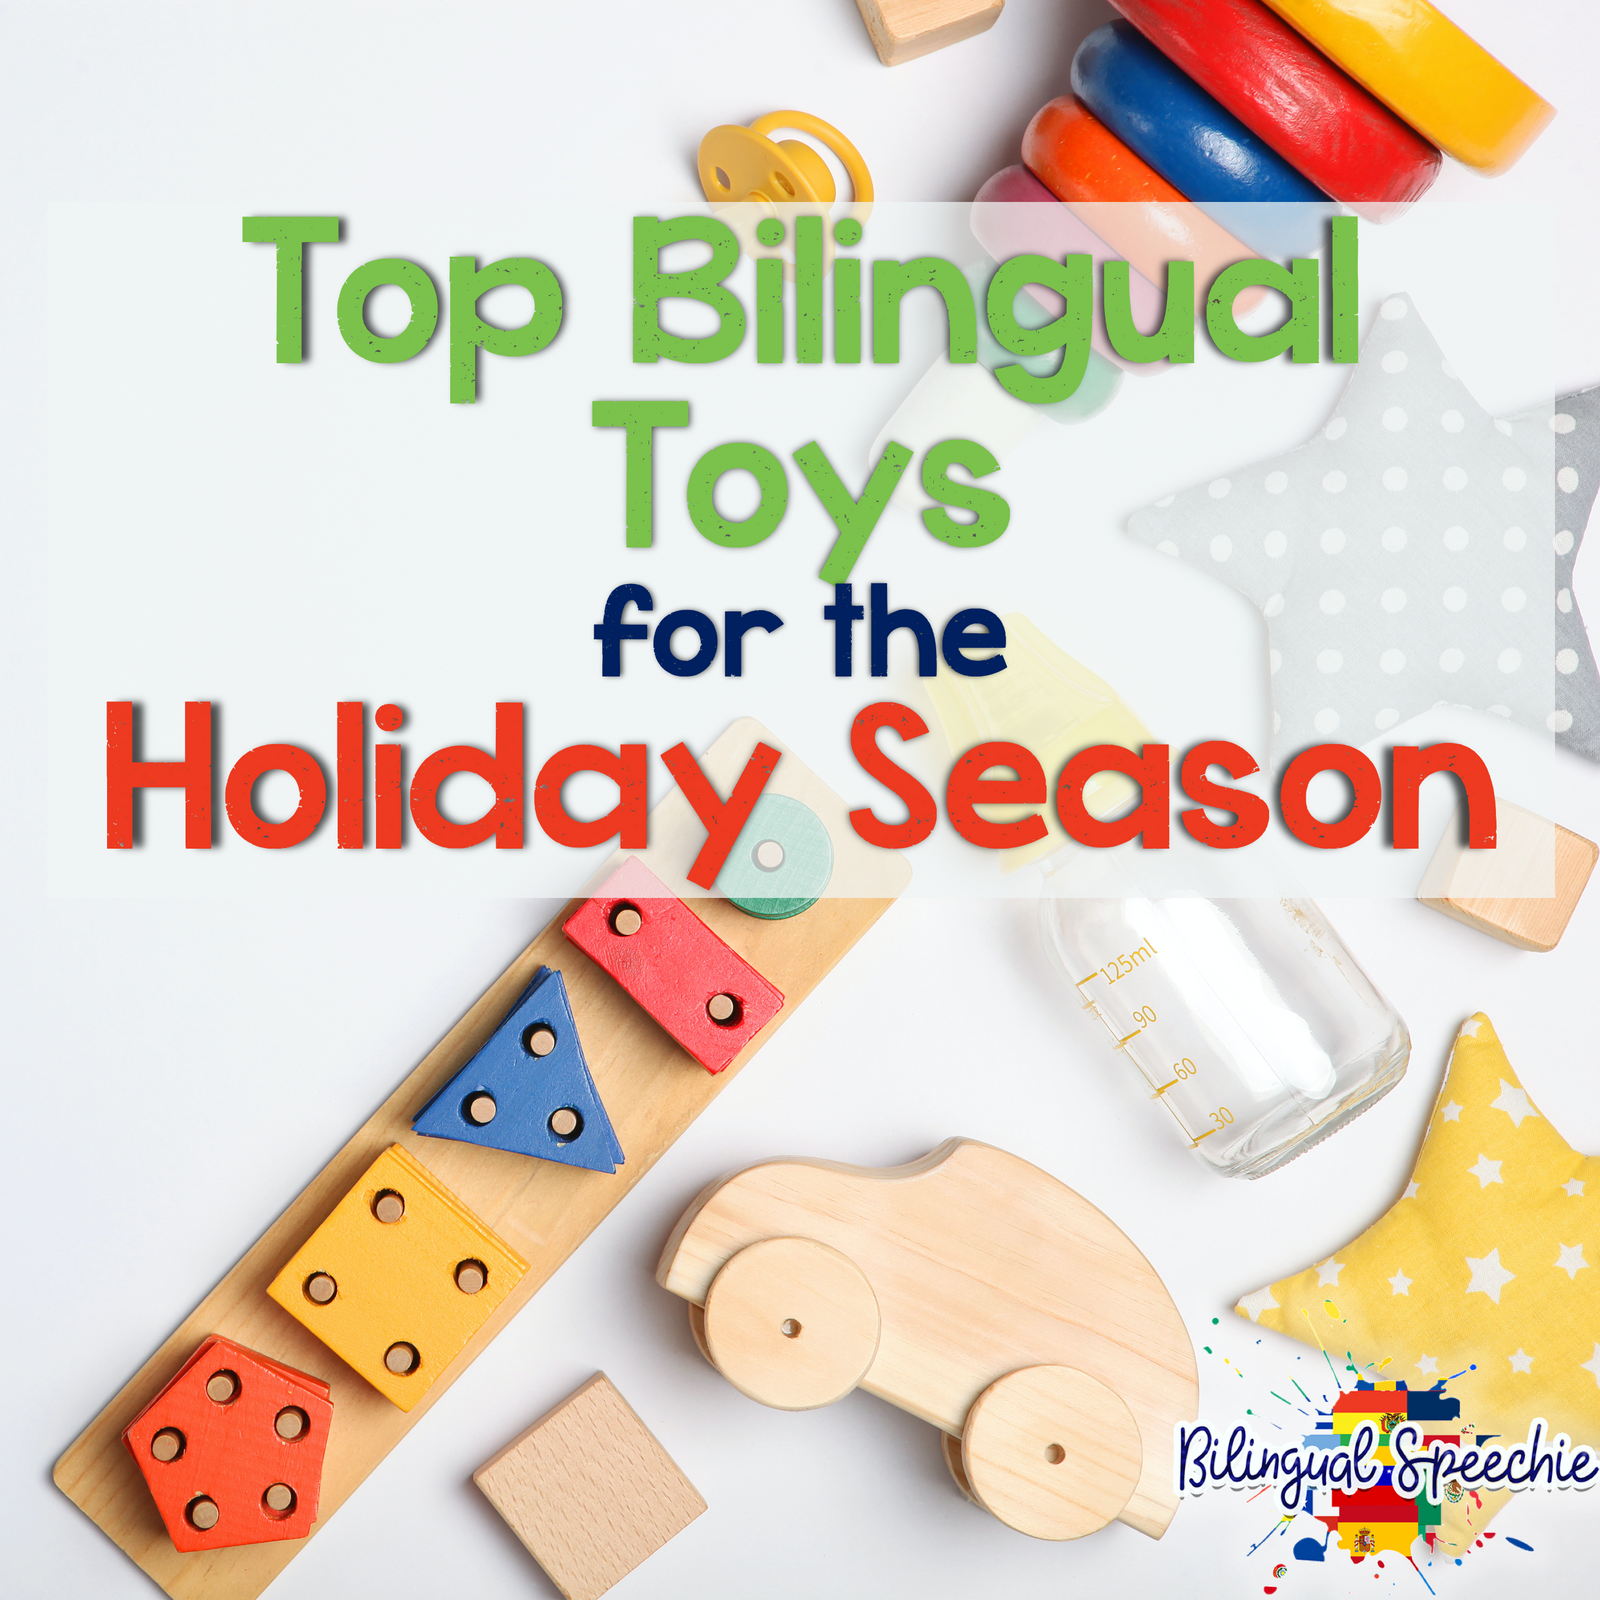 Top Bilingual Toys for the Holiday Season